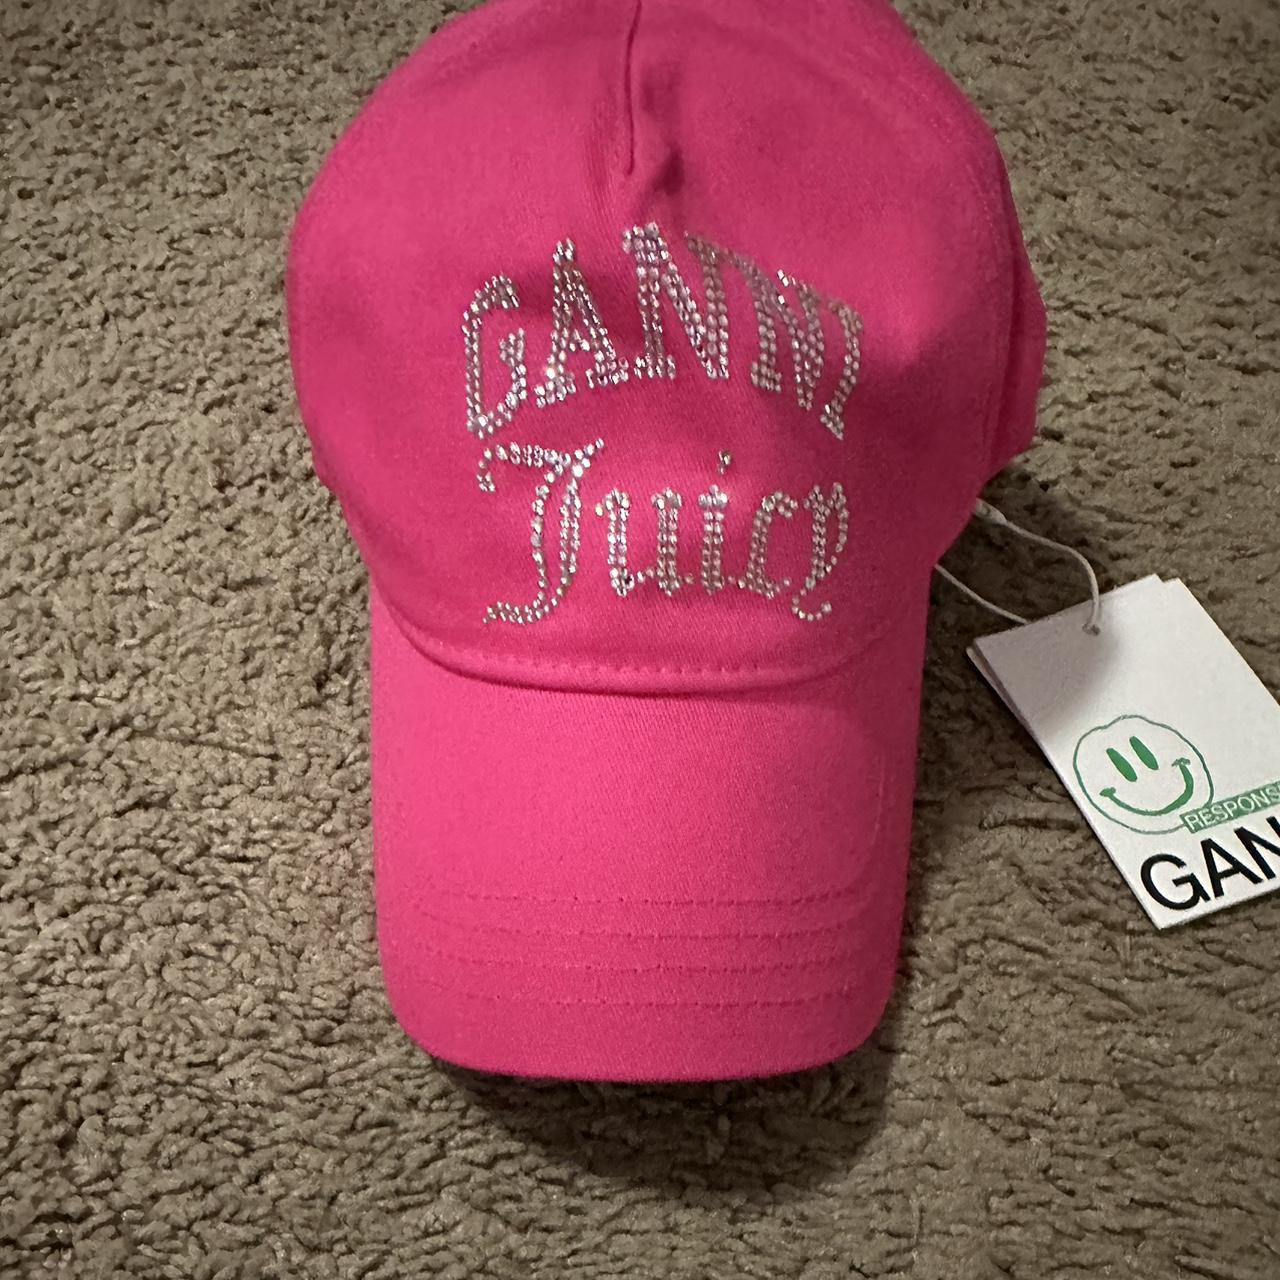 What to Buy From the Ganni x Juicy Couture Collab